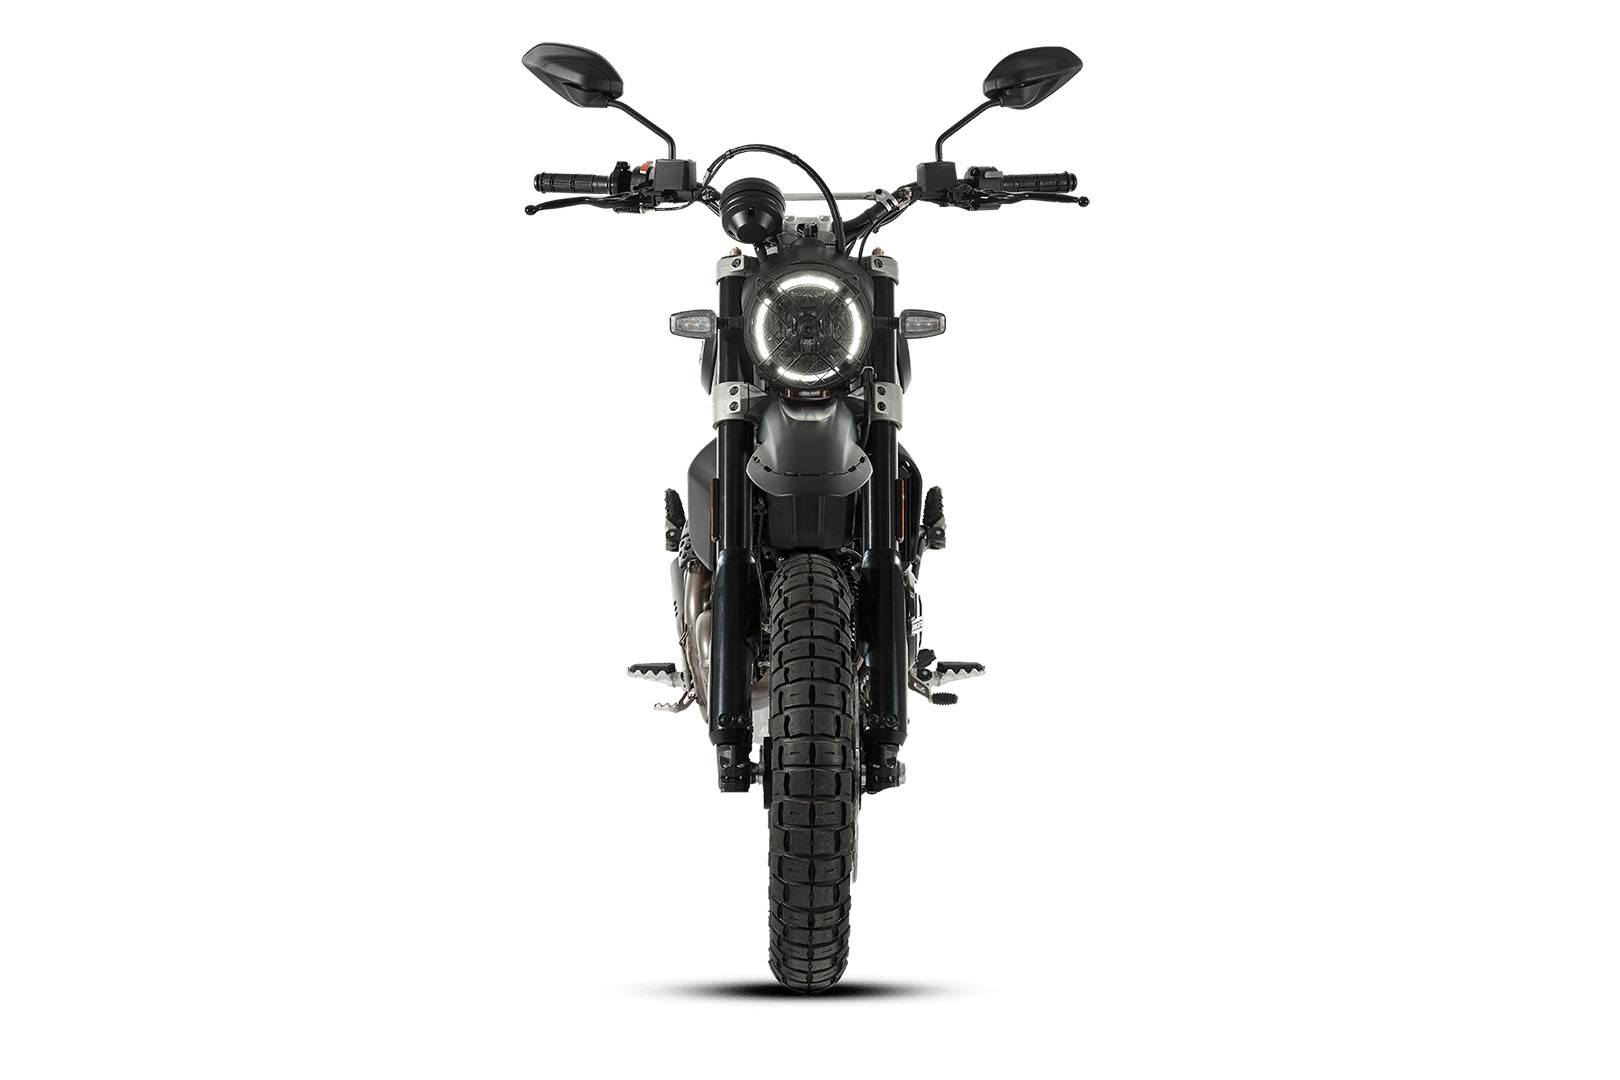 New 21 Ducati Scrambler Desert Sled Fasthouse Le Motorcycles In Fort Montgomery Ny Stock Number